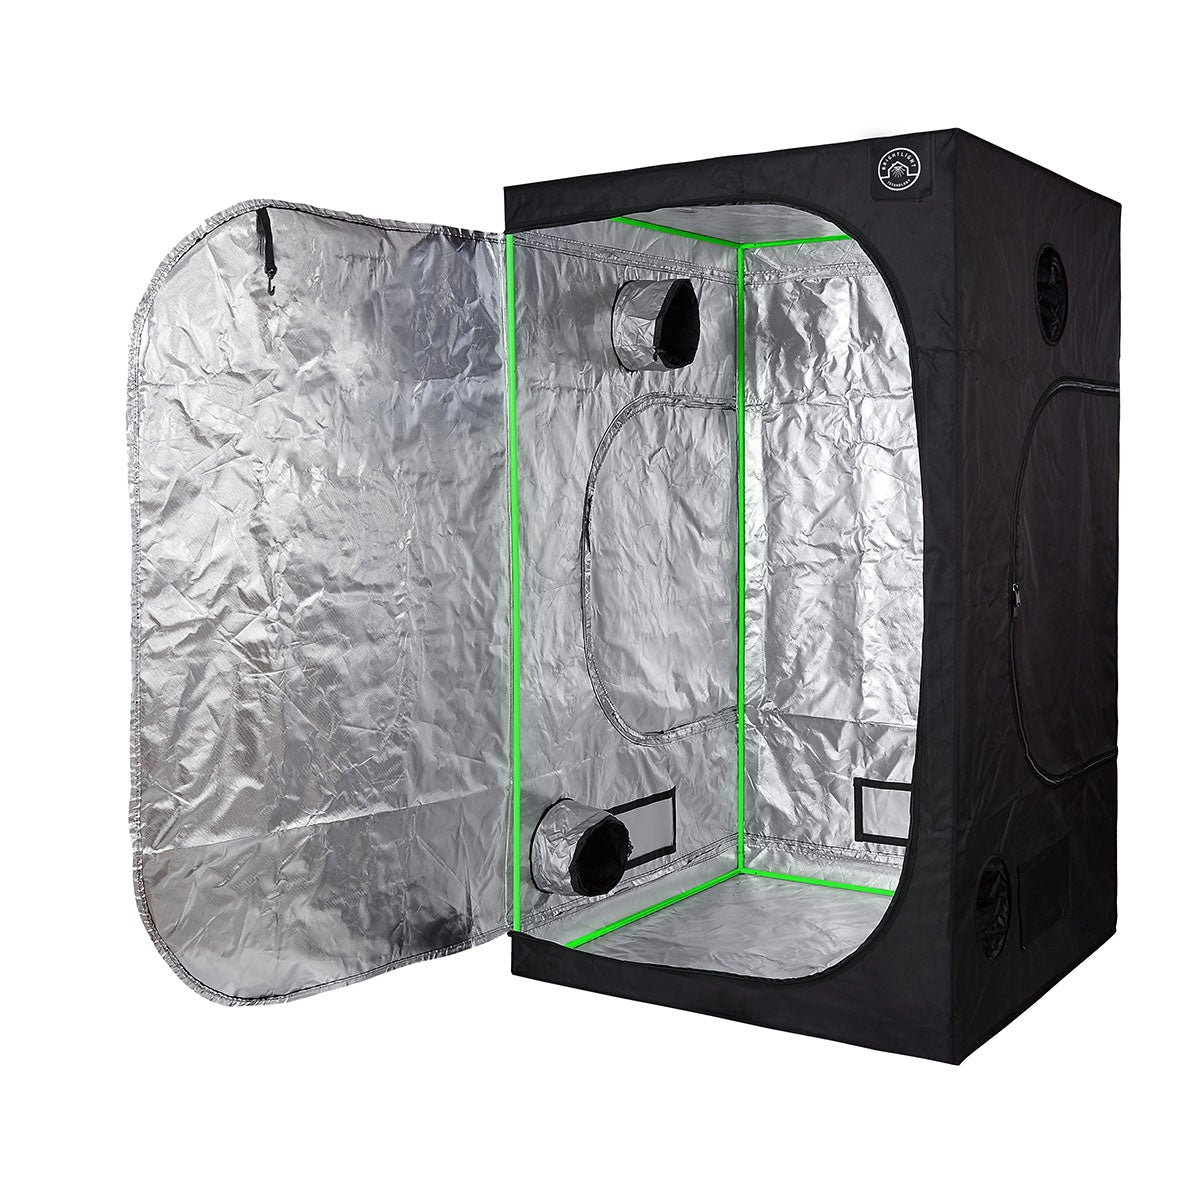 Growbox Completo PRO Led 120x120x200 - ASTROLED 2.0 680W